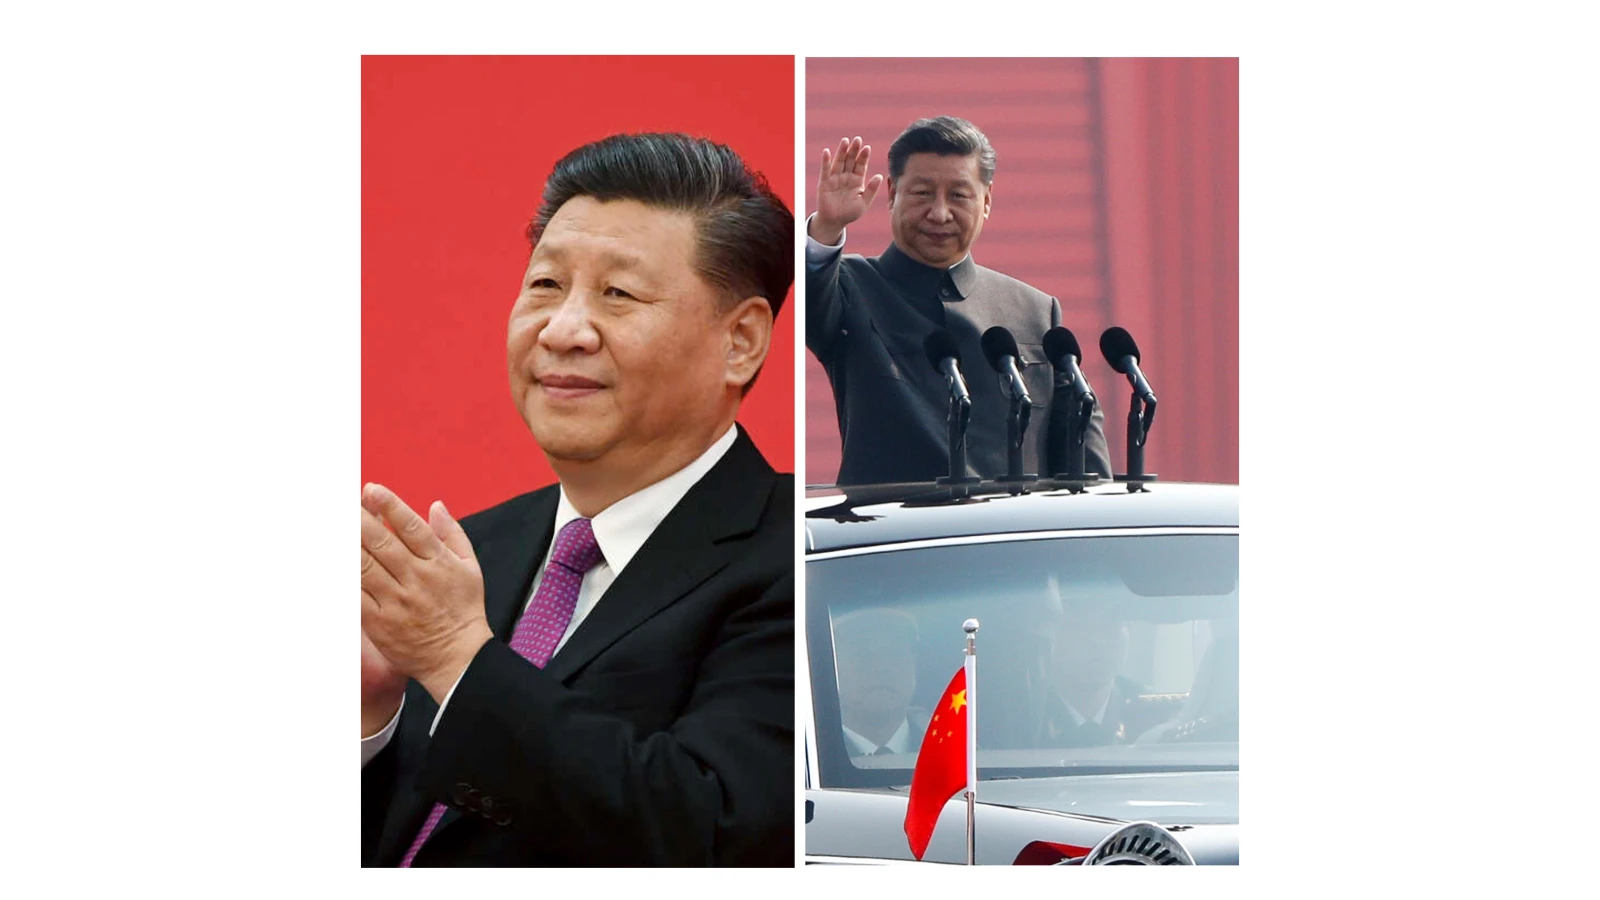 Xi Jinping Net Worth 2023, Annual Income, Age, Family, House, Car Collection etc.